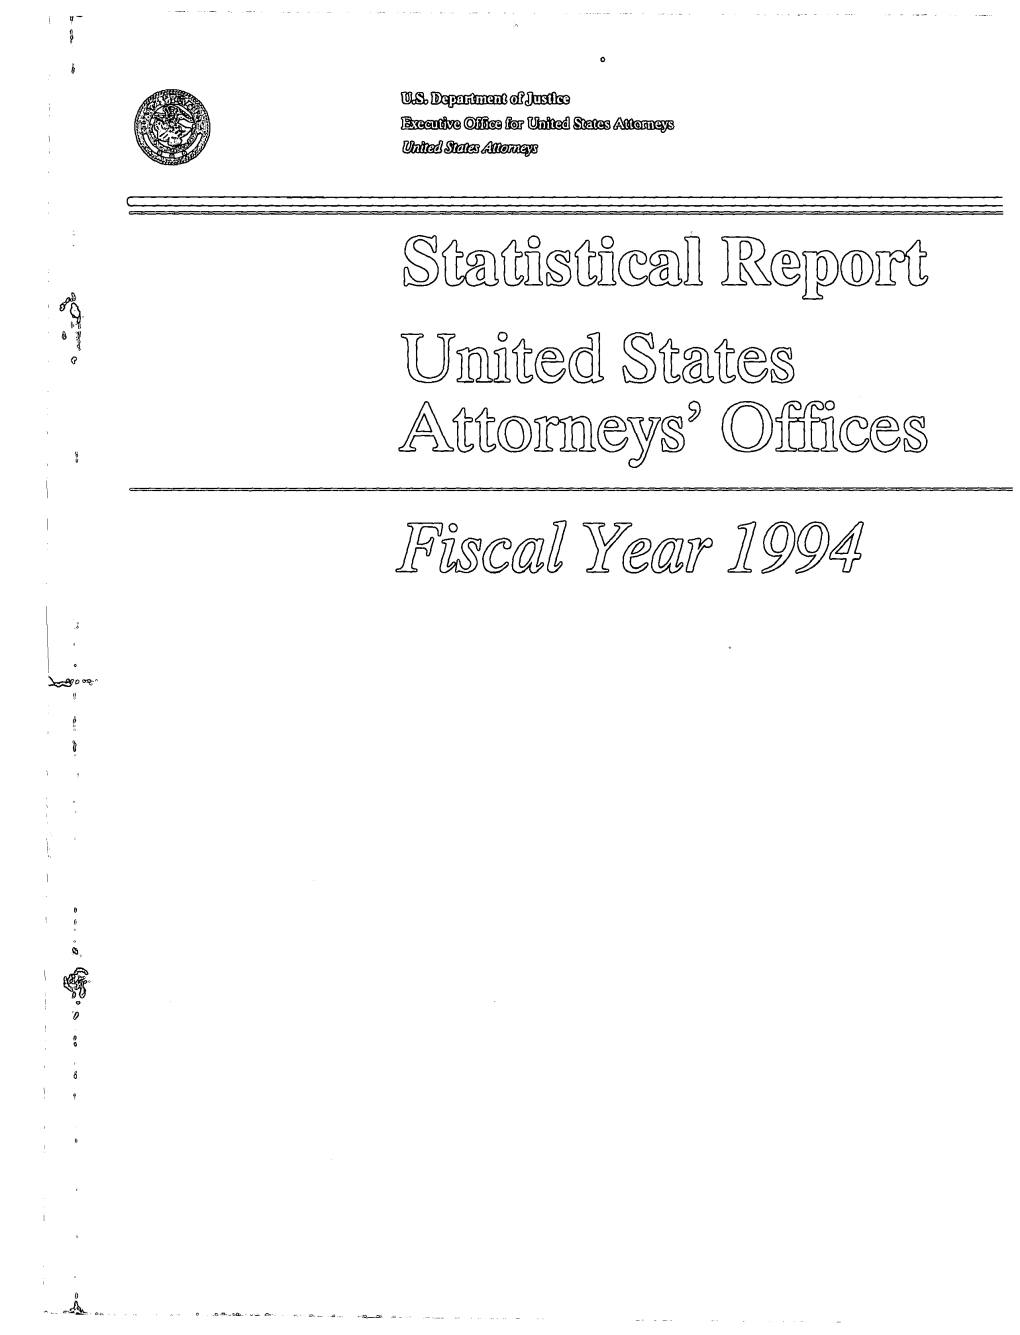 Fiscal Year 1994